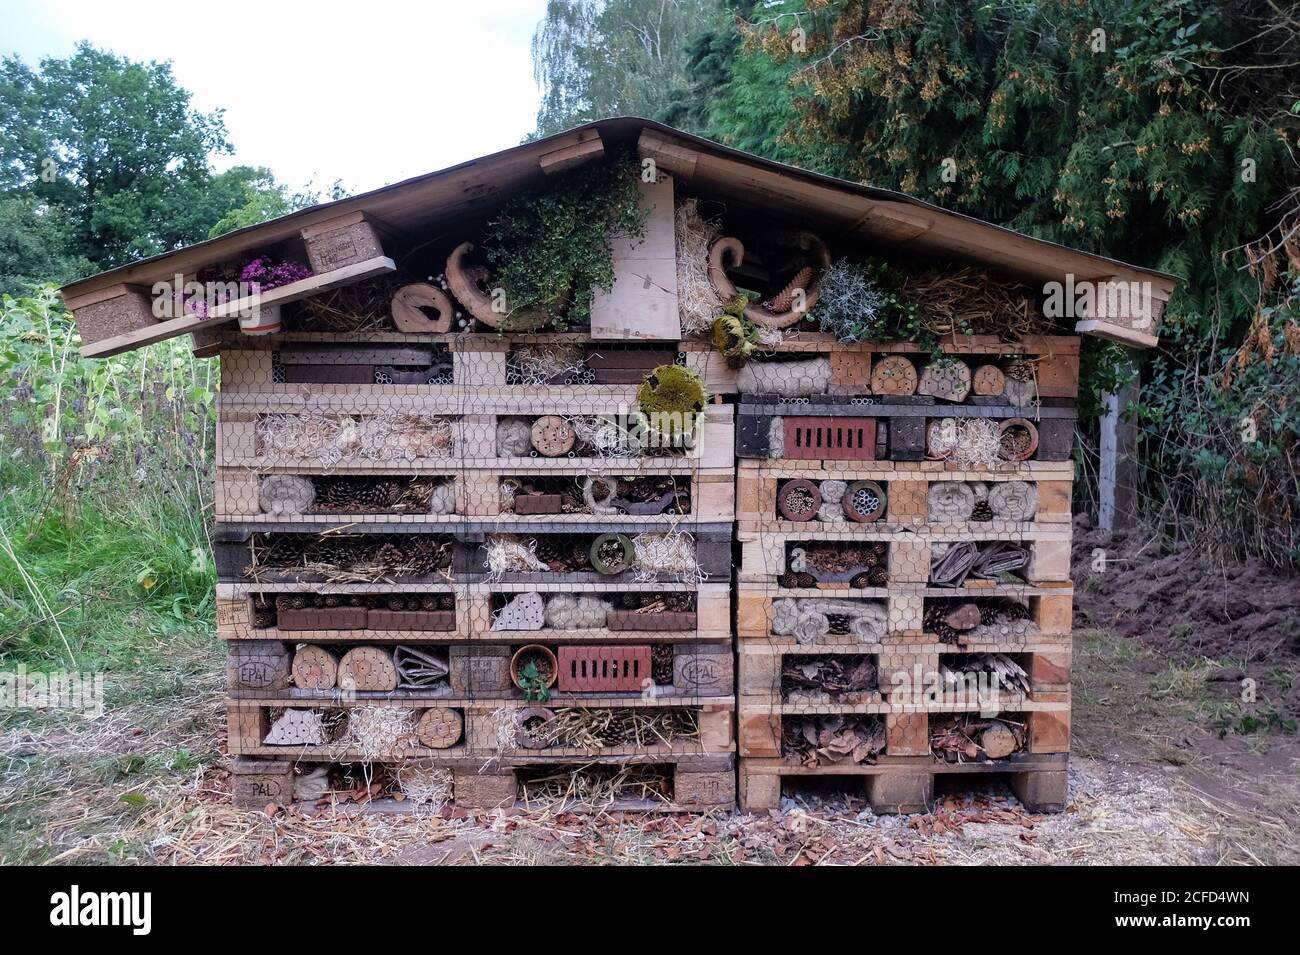 Large insect hotel made of pallets, perforated stones and many natural materials Stock Photo